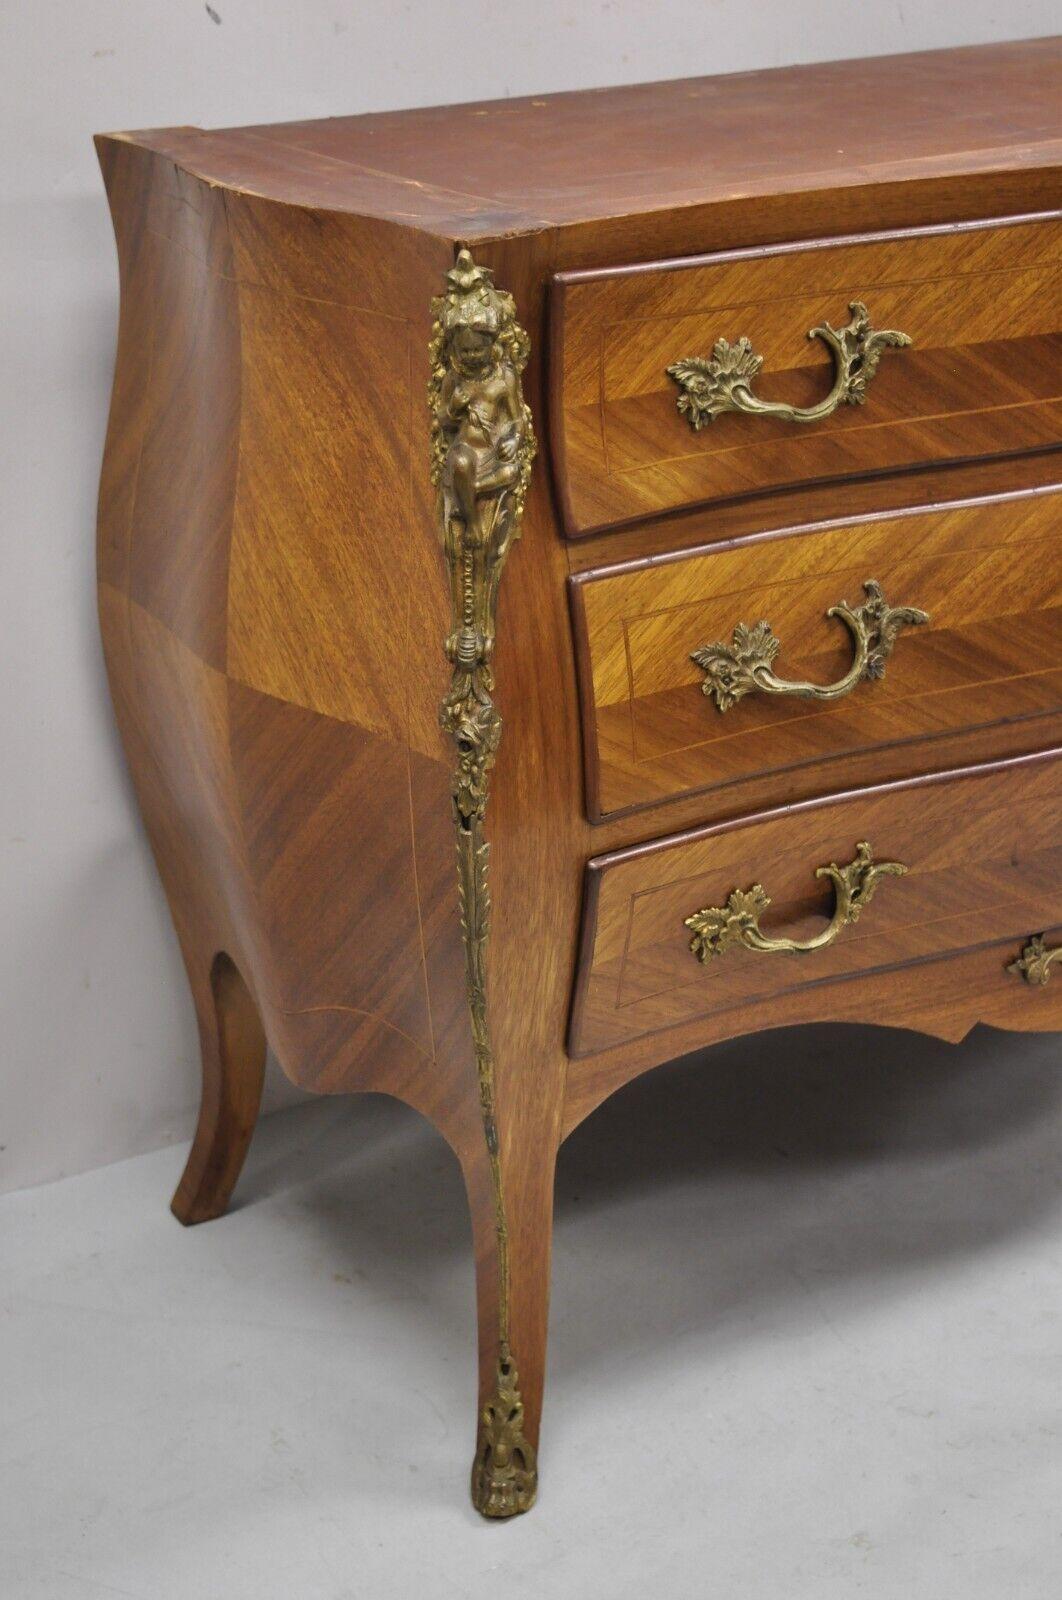 Vintage French Louis XV style bombe commode chest of drawers with cherub figures. Item features bronze ormolu, shapely bombe form, cherub figures to sides, beautiful wood grain, no key, but unlocked, 3 dovetailed drawers, cabriole legs. Marble top